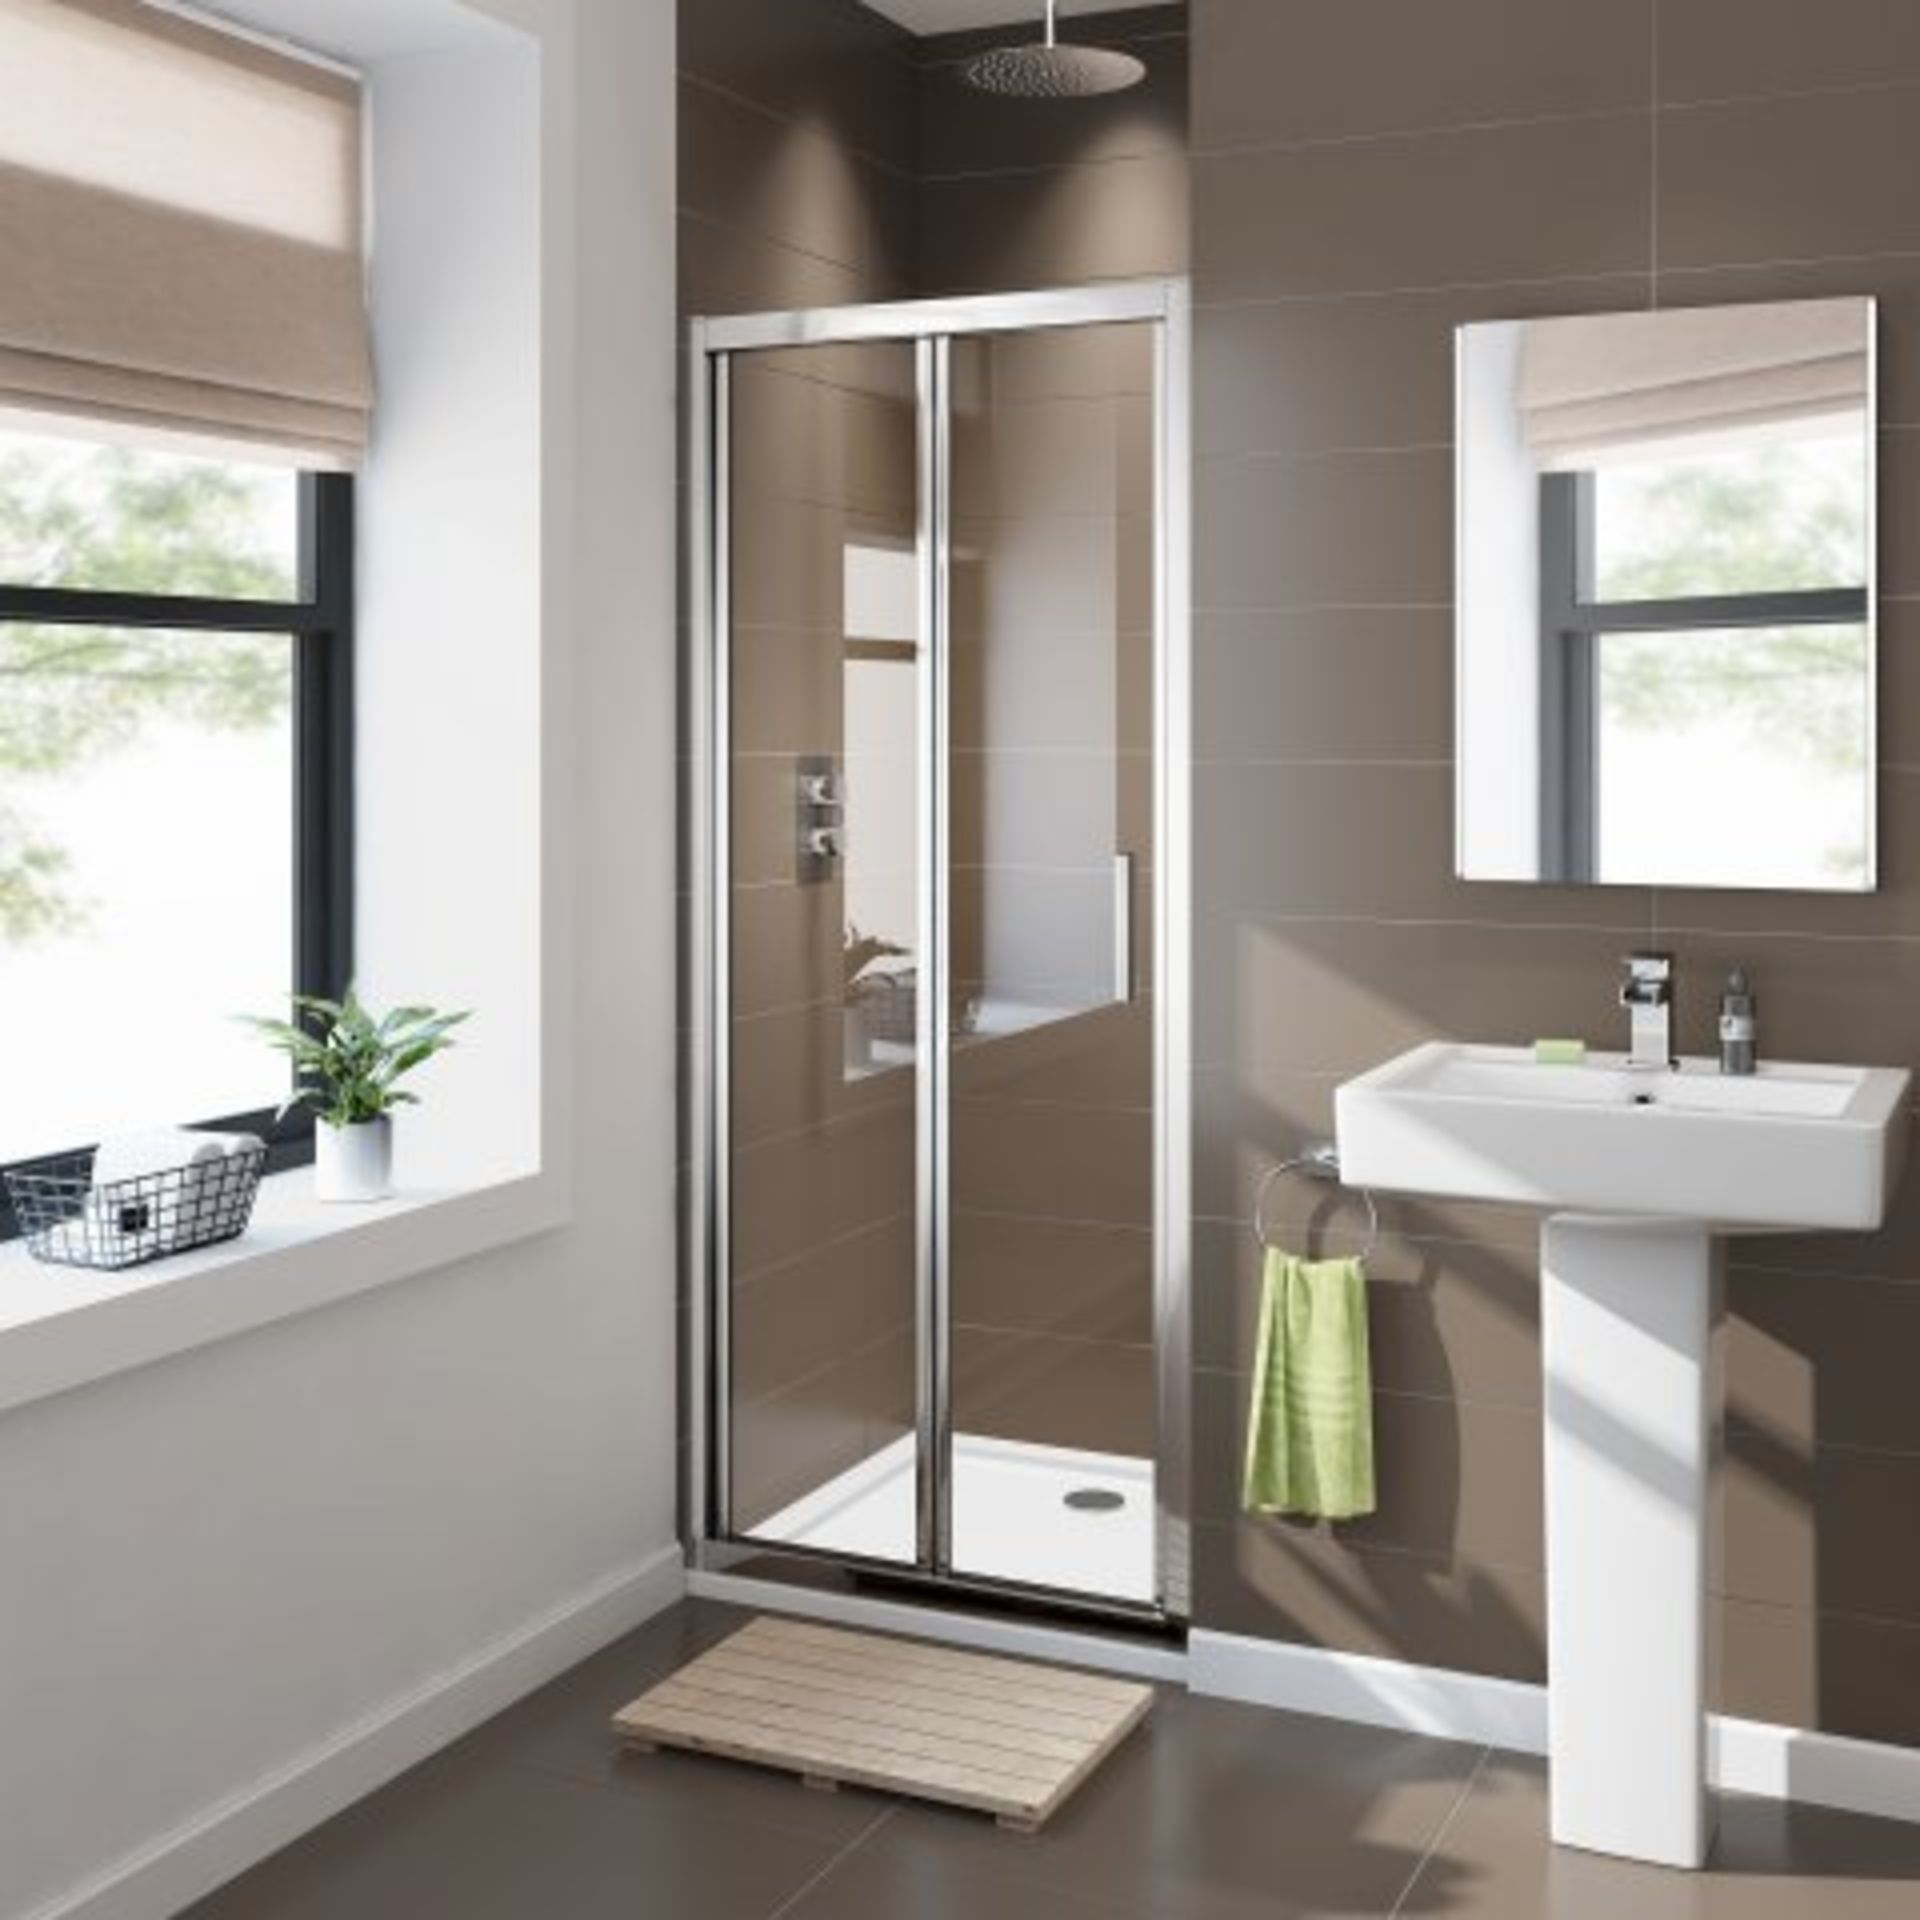 (M28) 800mm - 6mm - Elements EasyClean Bifold Shower Door. RRP £299.99. Do you have an awkward - Image 3 of 4